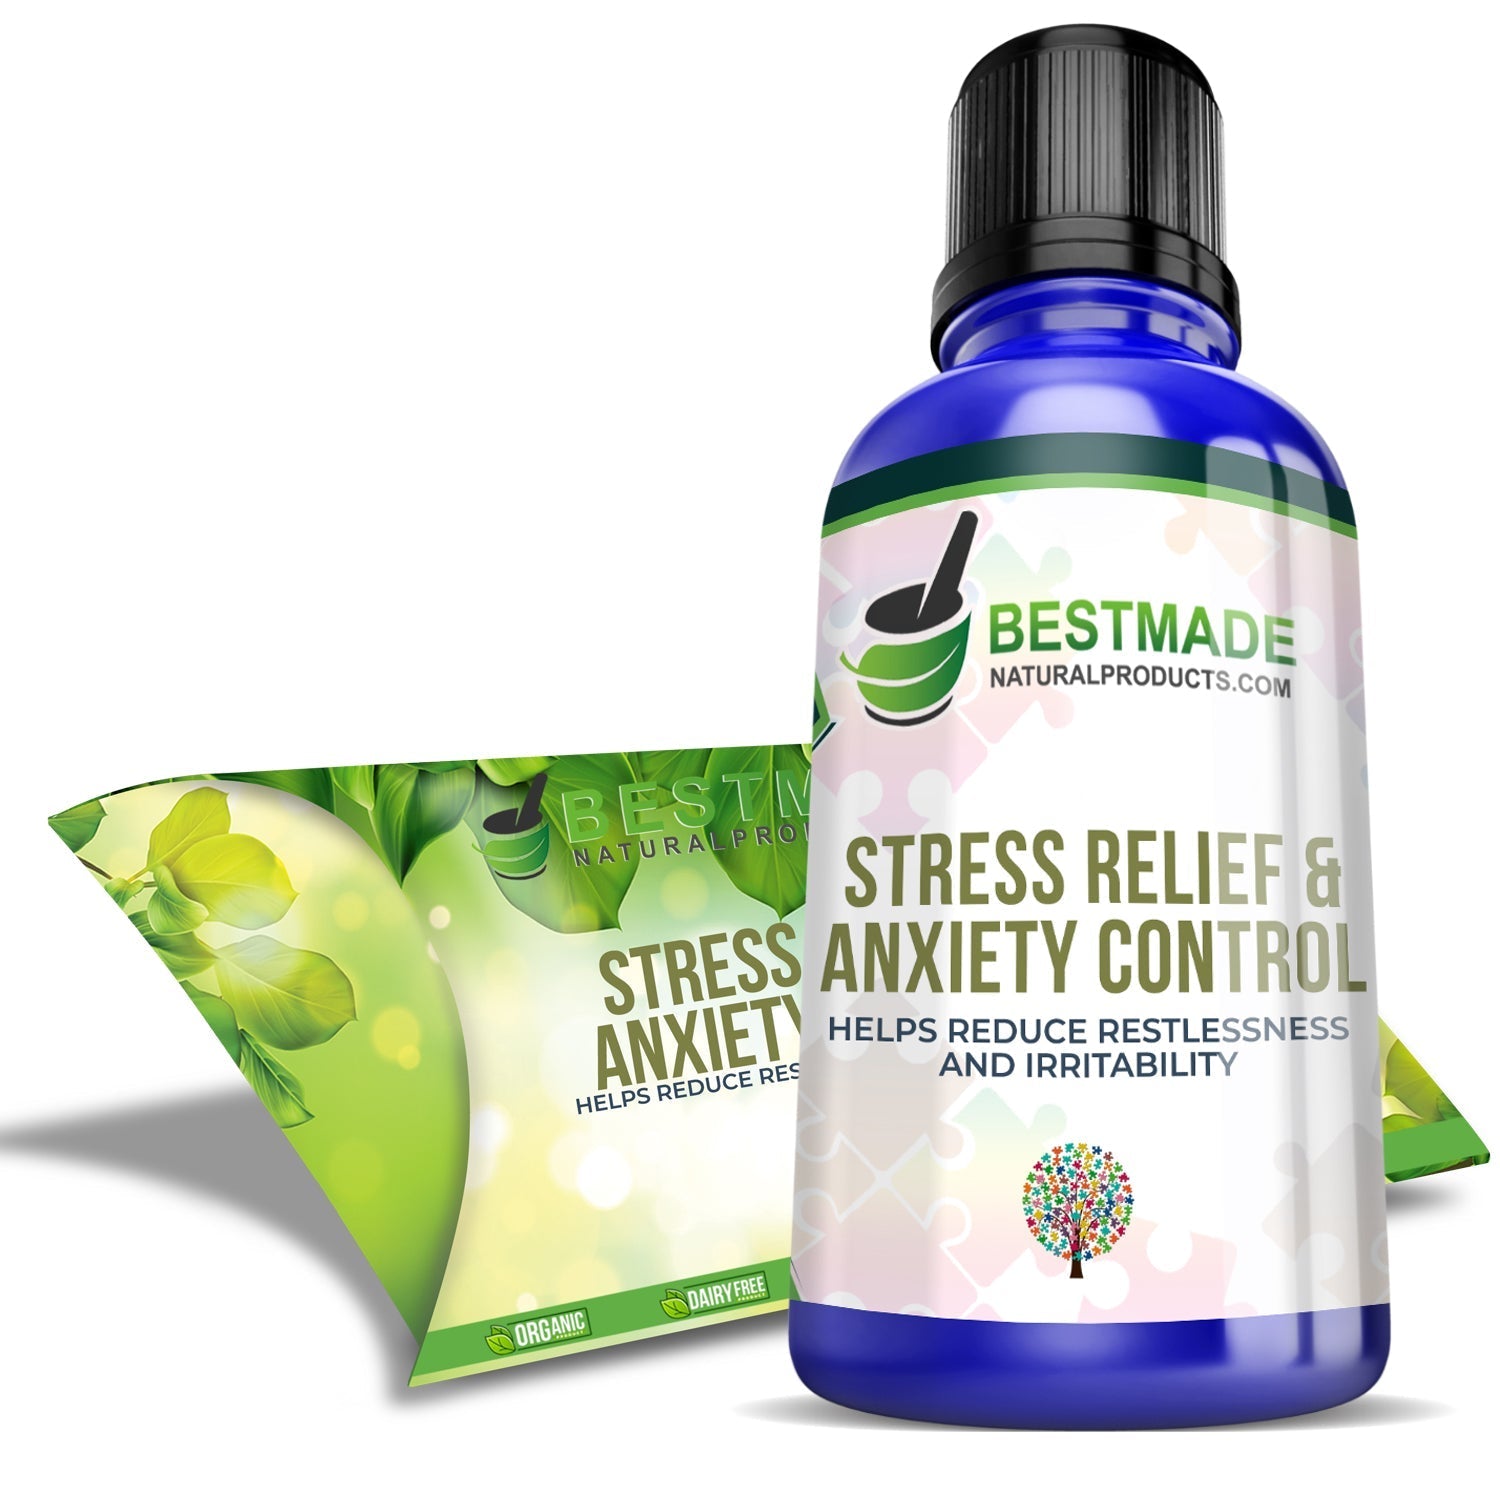 11 stress relief products: For work, for home, and more